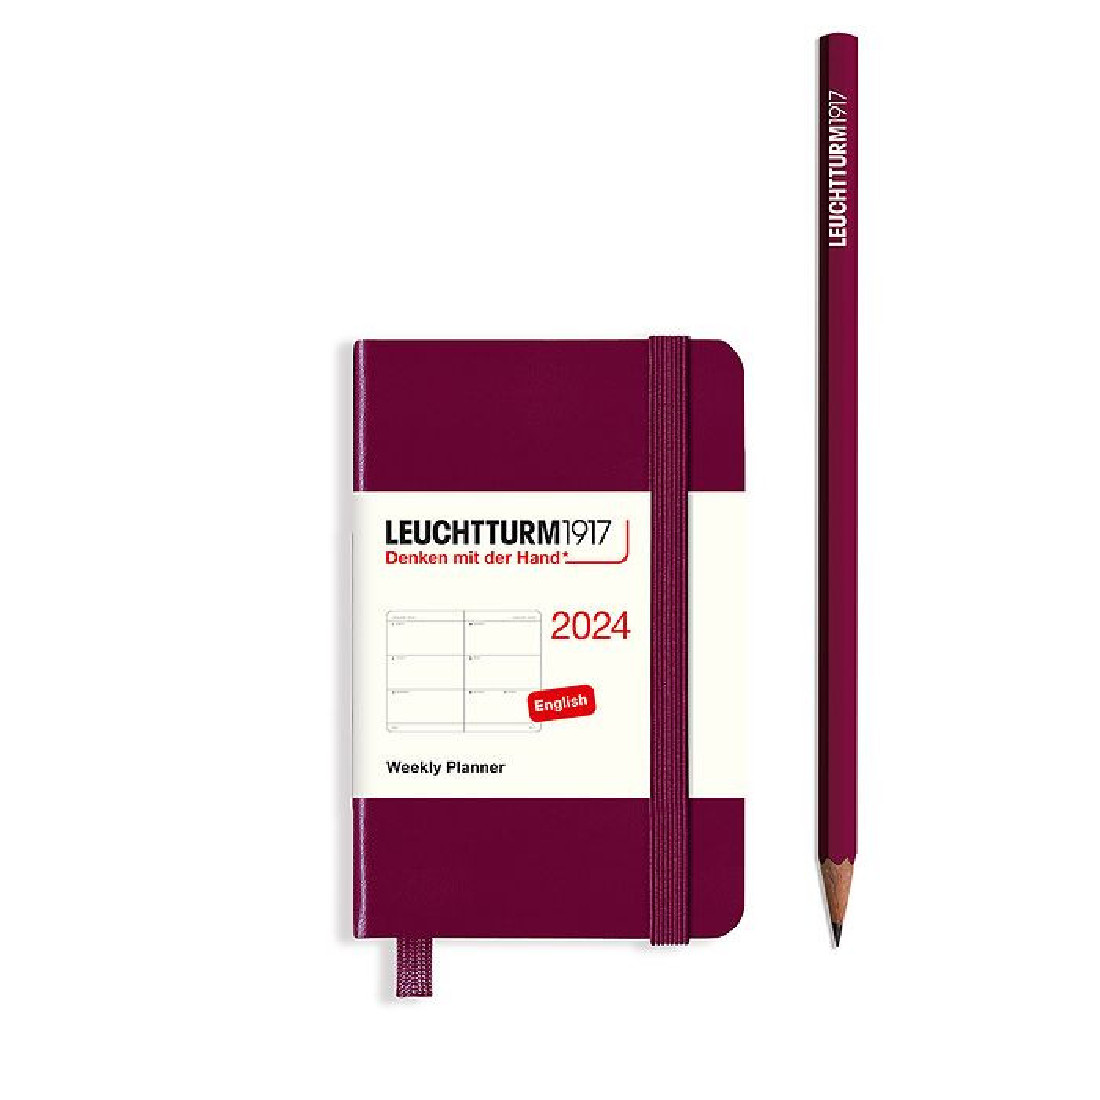 Leuchtturm 1917 Weekly Planner 2024 Port Red Mini A7 Hard Cover